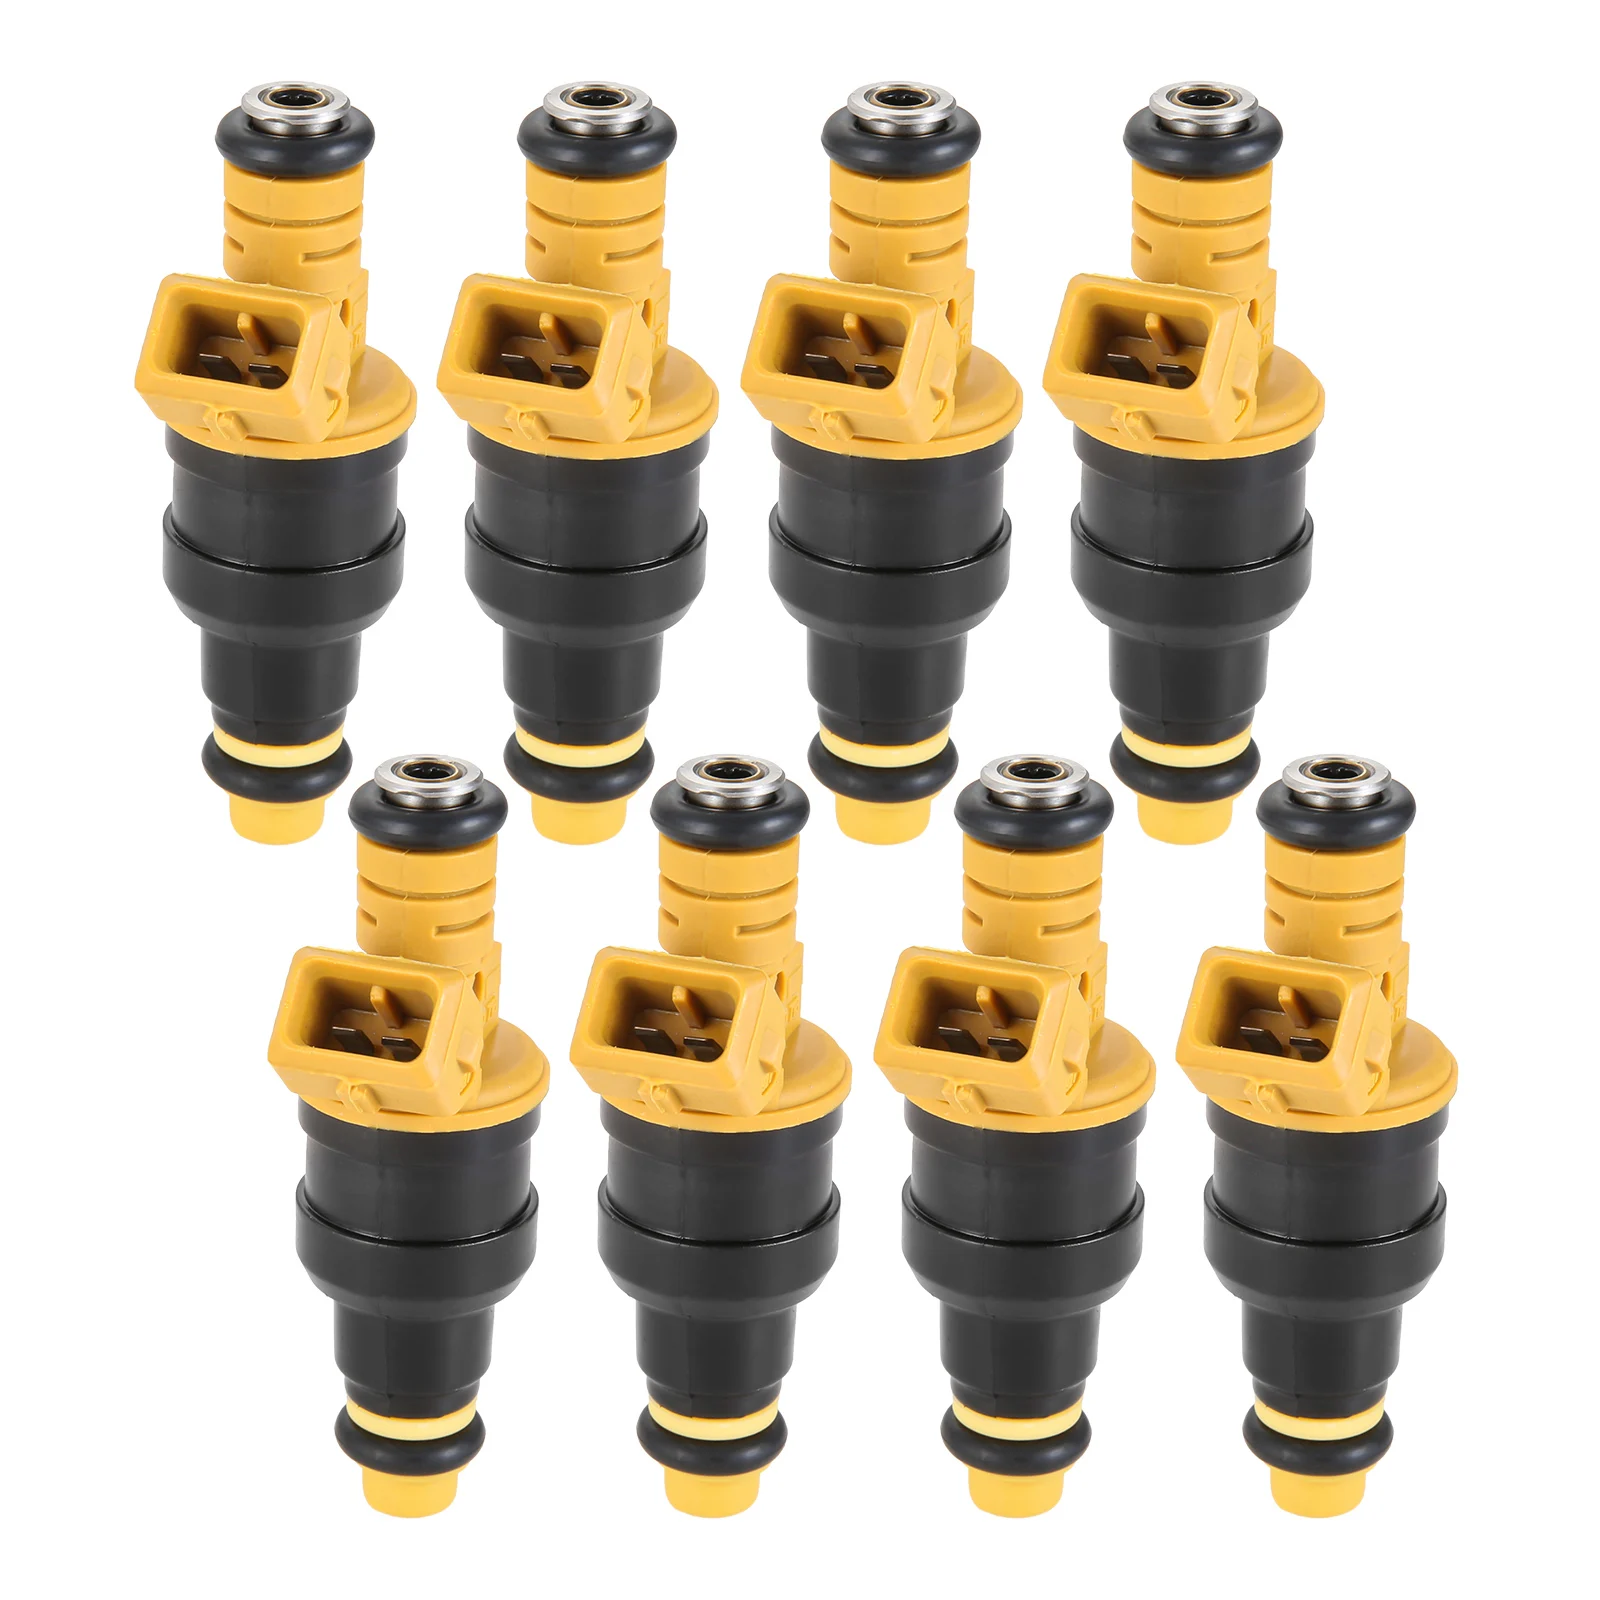 

8 PCS 0280150718 Fuel Injector for Ford F150 F250 F350 E150 E250 Mustang Expedition Lincoln Mercury 4.6L 5.0L 5.4L 5.8L Engine